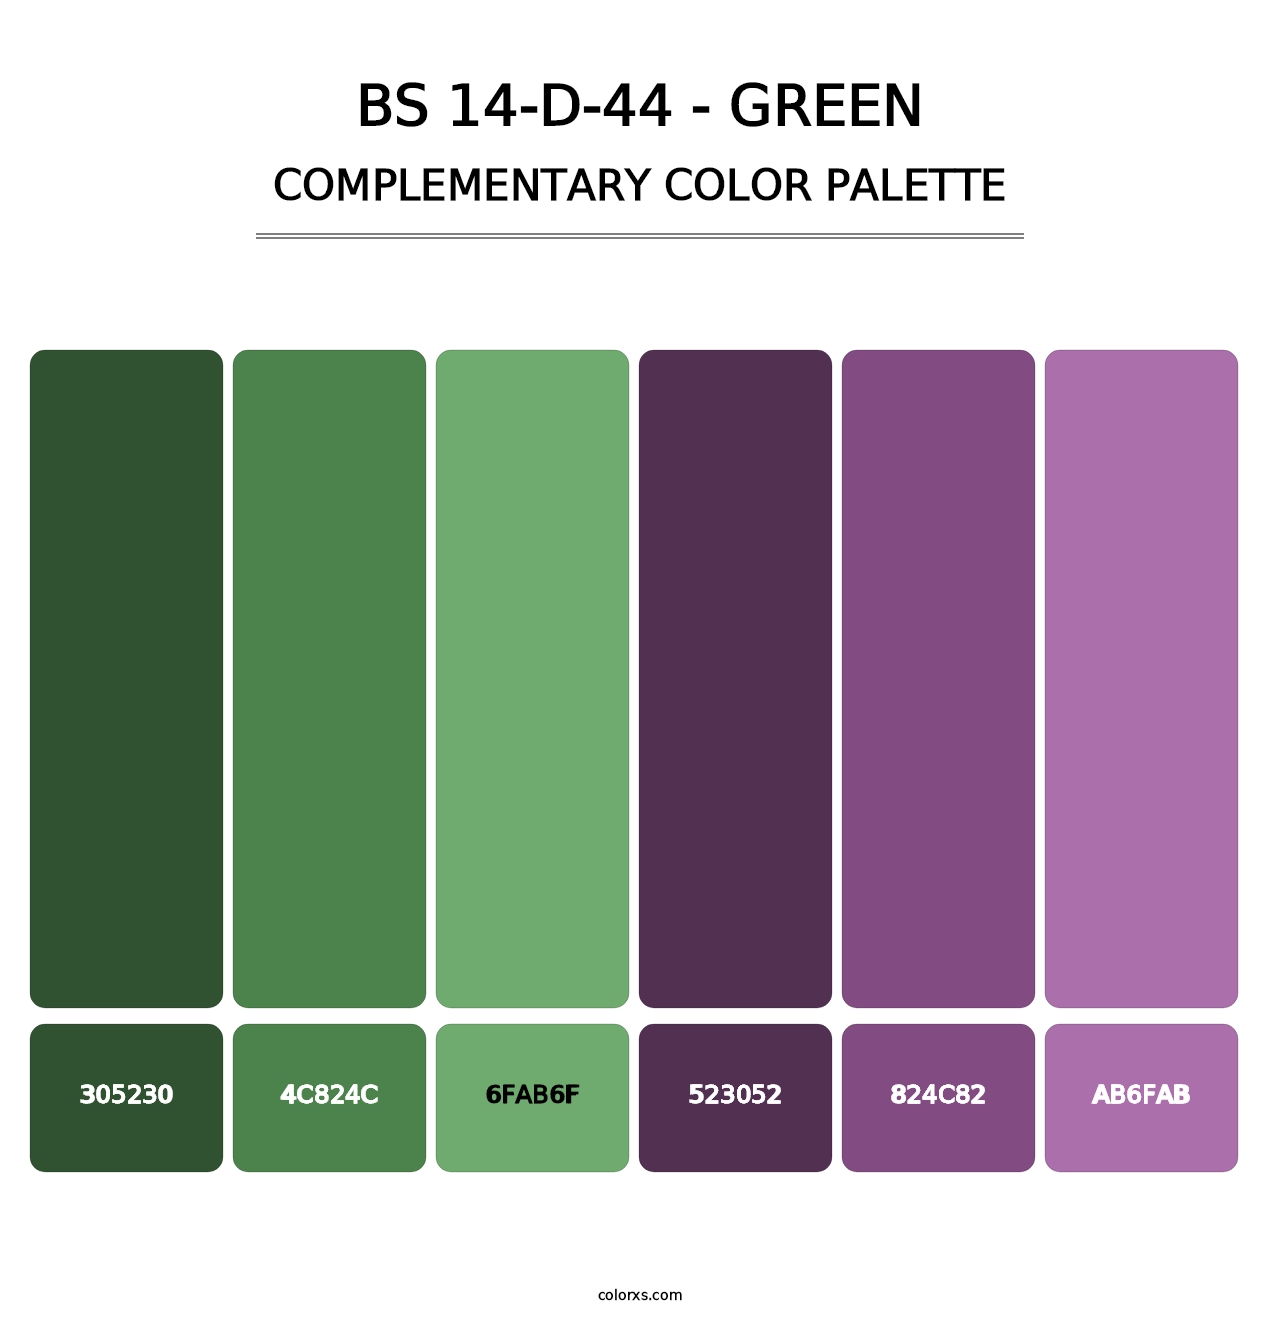 BS 14-D-44 - Green - Complementary Color Palette